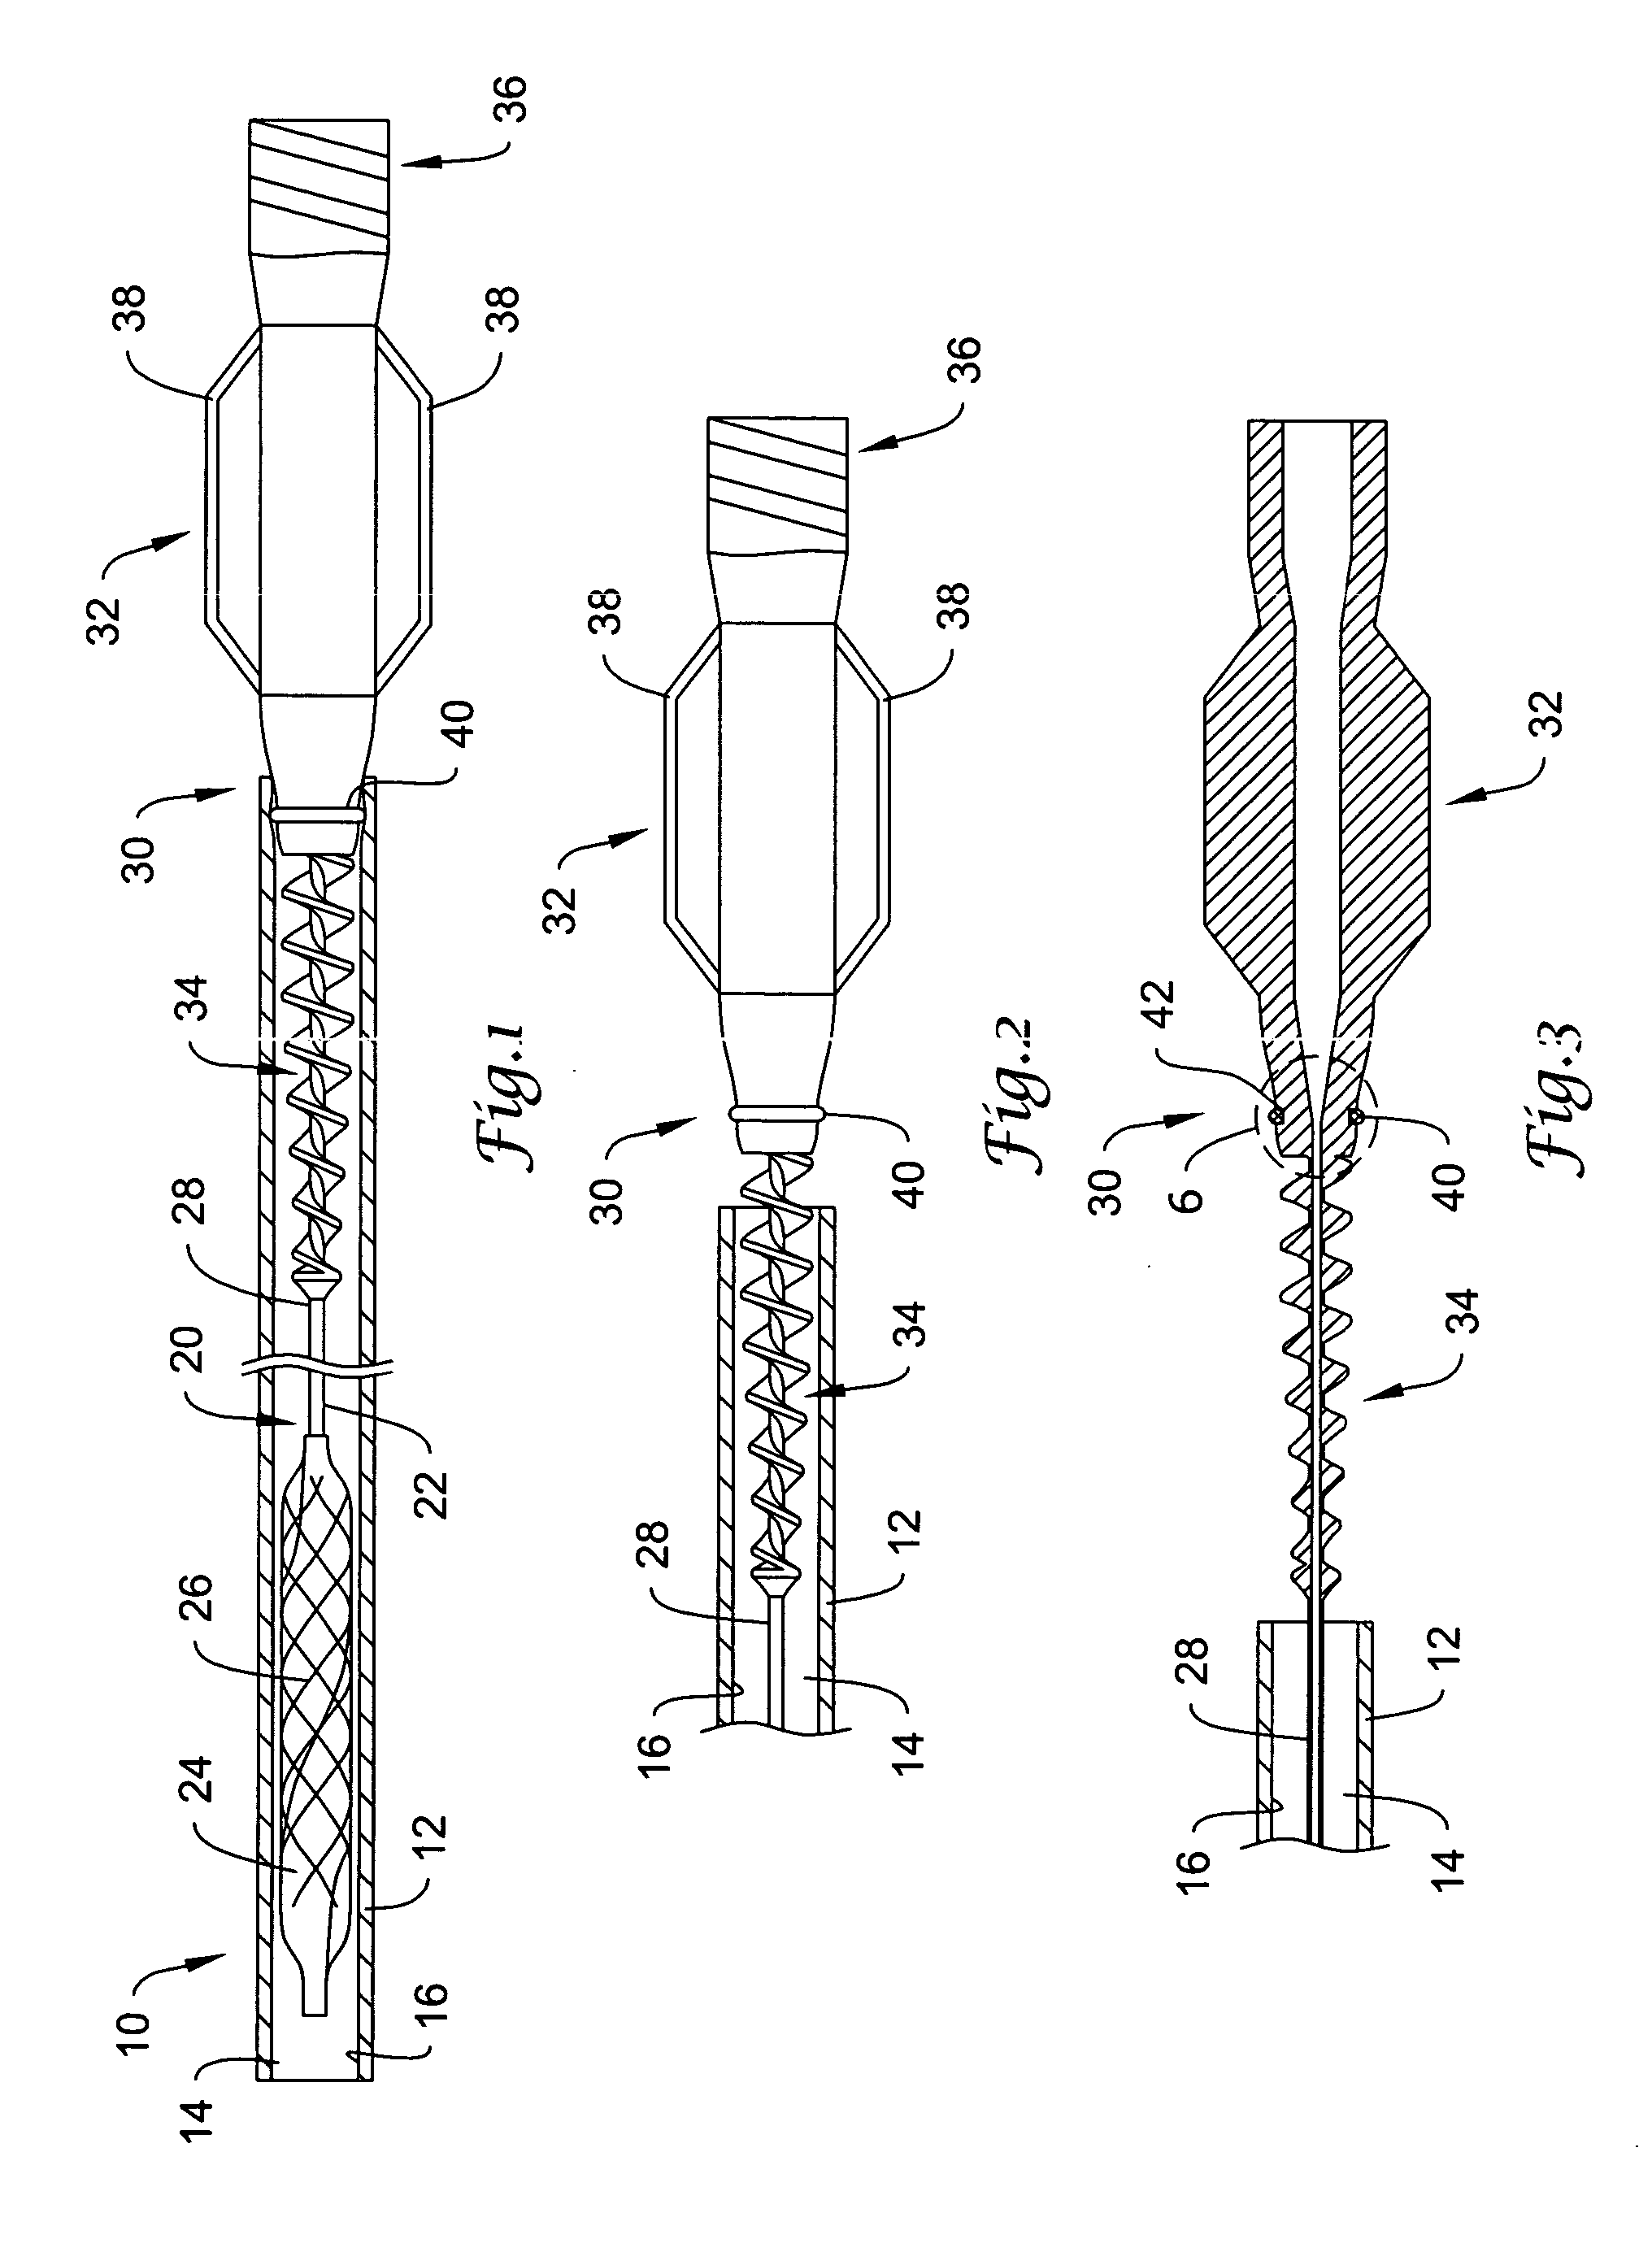 Elongate medical device having an interference fit packaging member